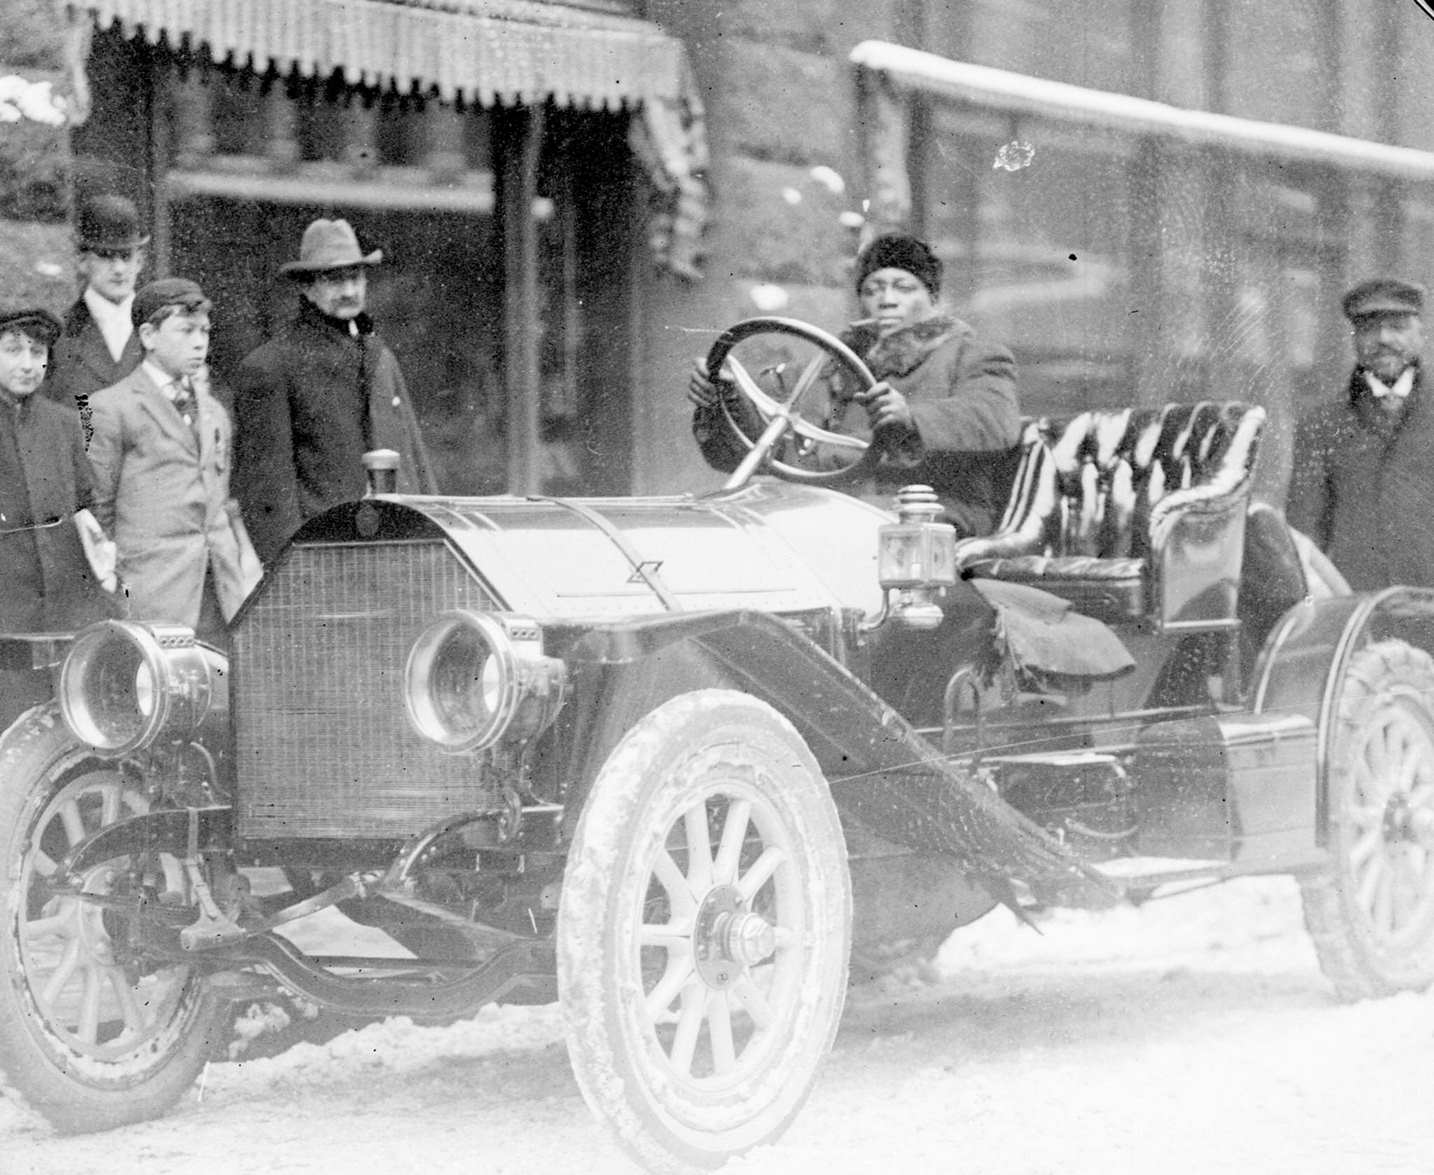 Pugilist Jack Johnson sitting in the driver's seat of a convertible automobile and holding on to the steering wheel on a snow-covered street in Chicago, Illinois, 1910s.